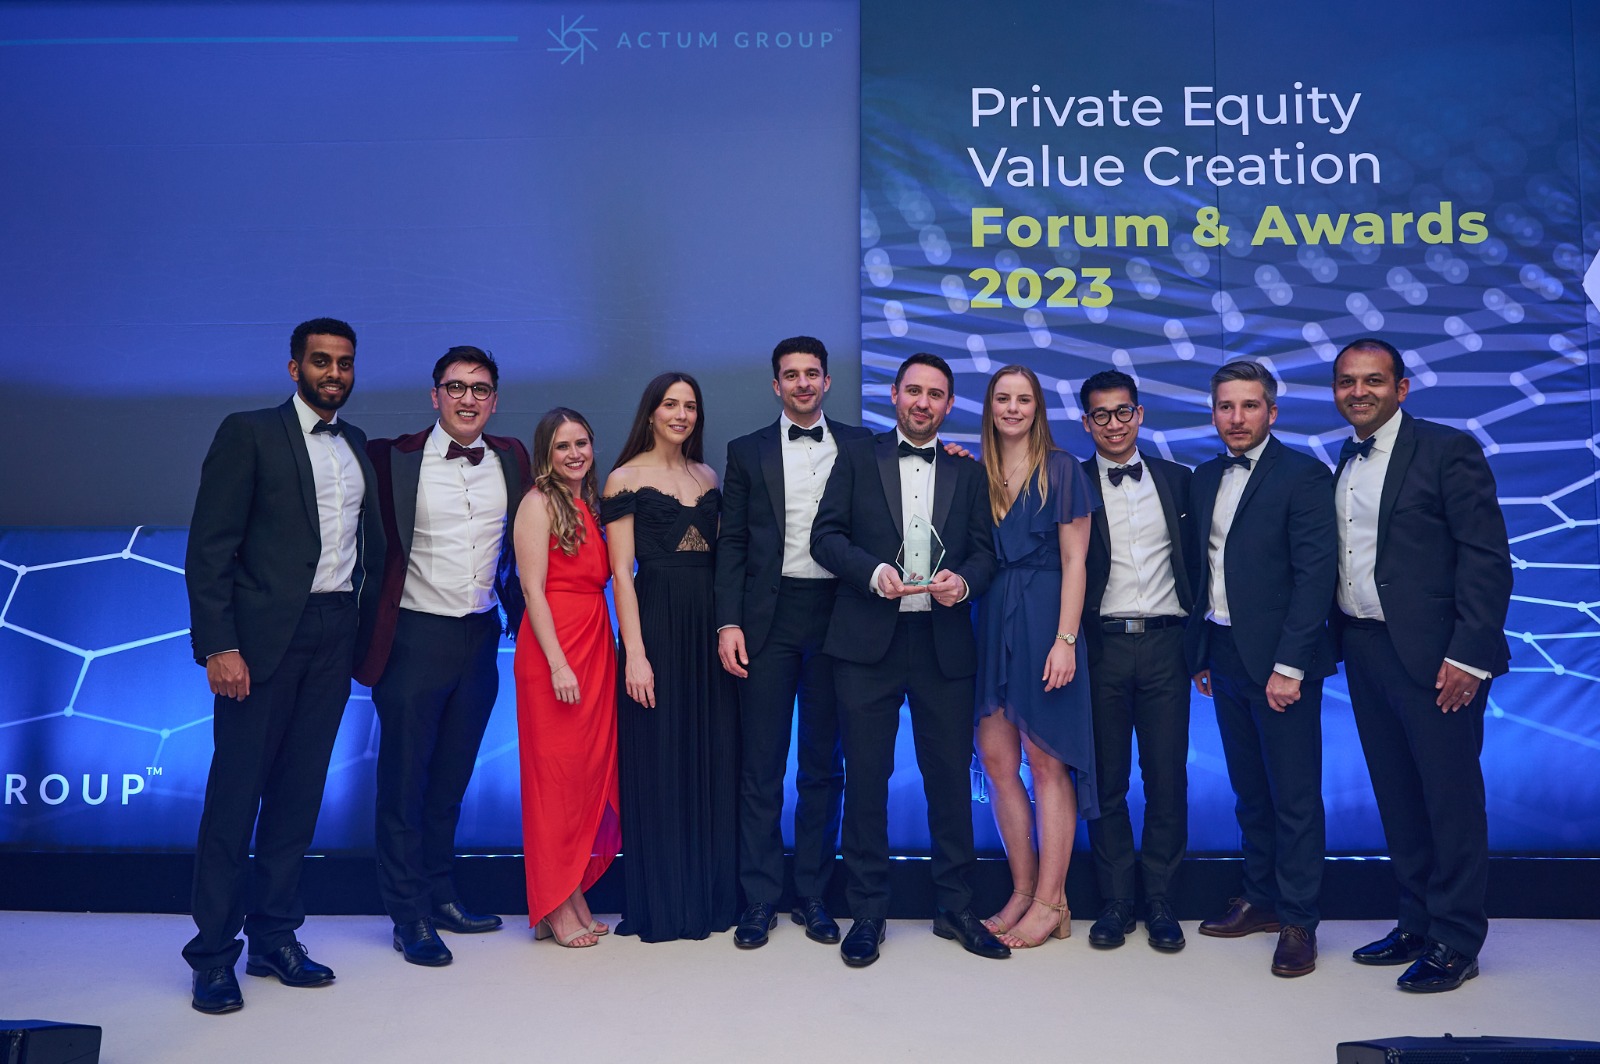 Palladium named Value Creation Firm of the Year